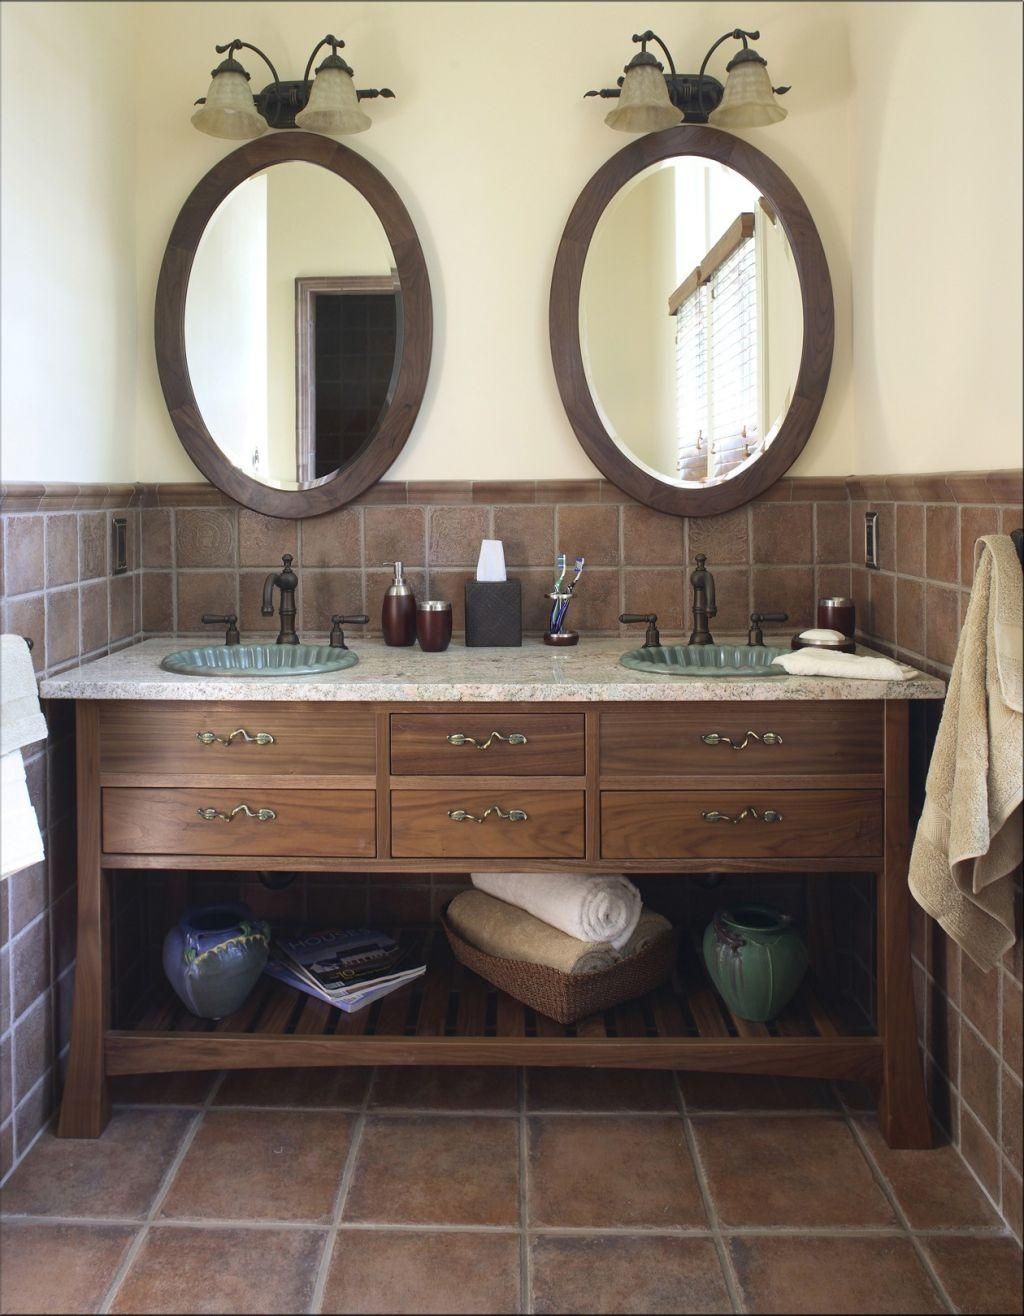 Oval Bathroom Mirrors Design | Homeoofficee Intended For Safety Mirrors For Bathrooms (View 9 of 20)